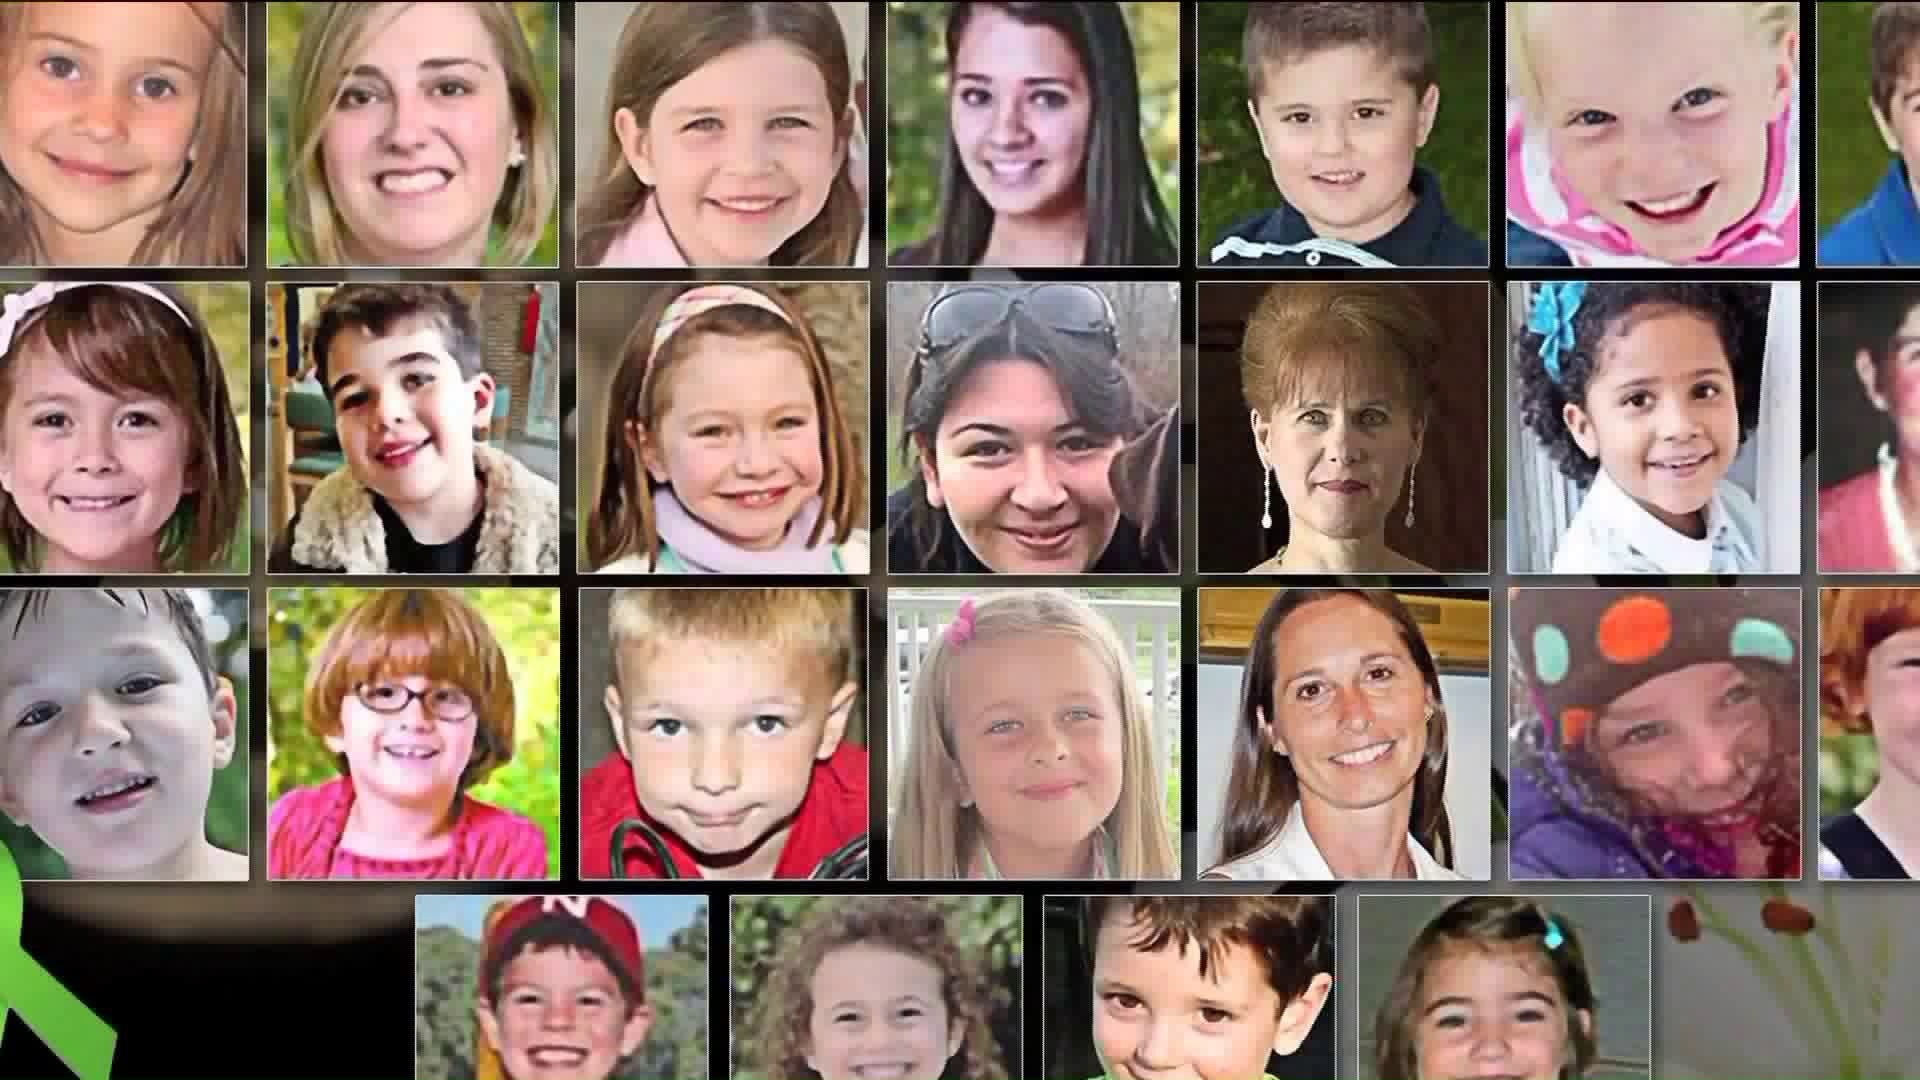 Court hears appeal in Newtown shooting case